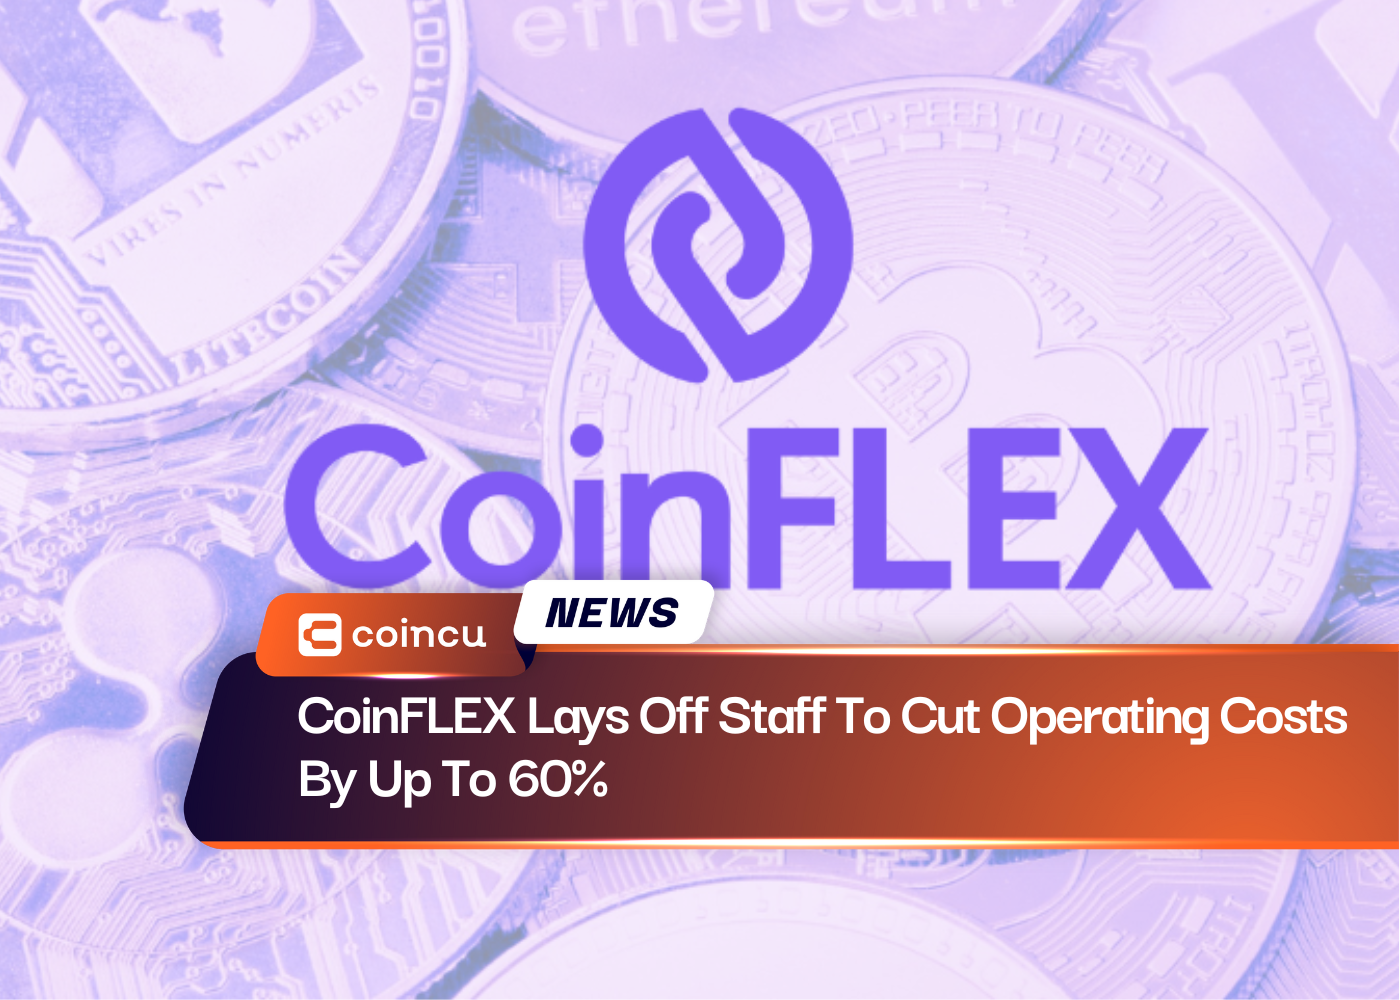 CoinFLEX Lays Off Staff To Cut Operating Costs By Up To 60%